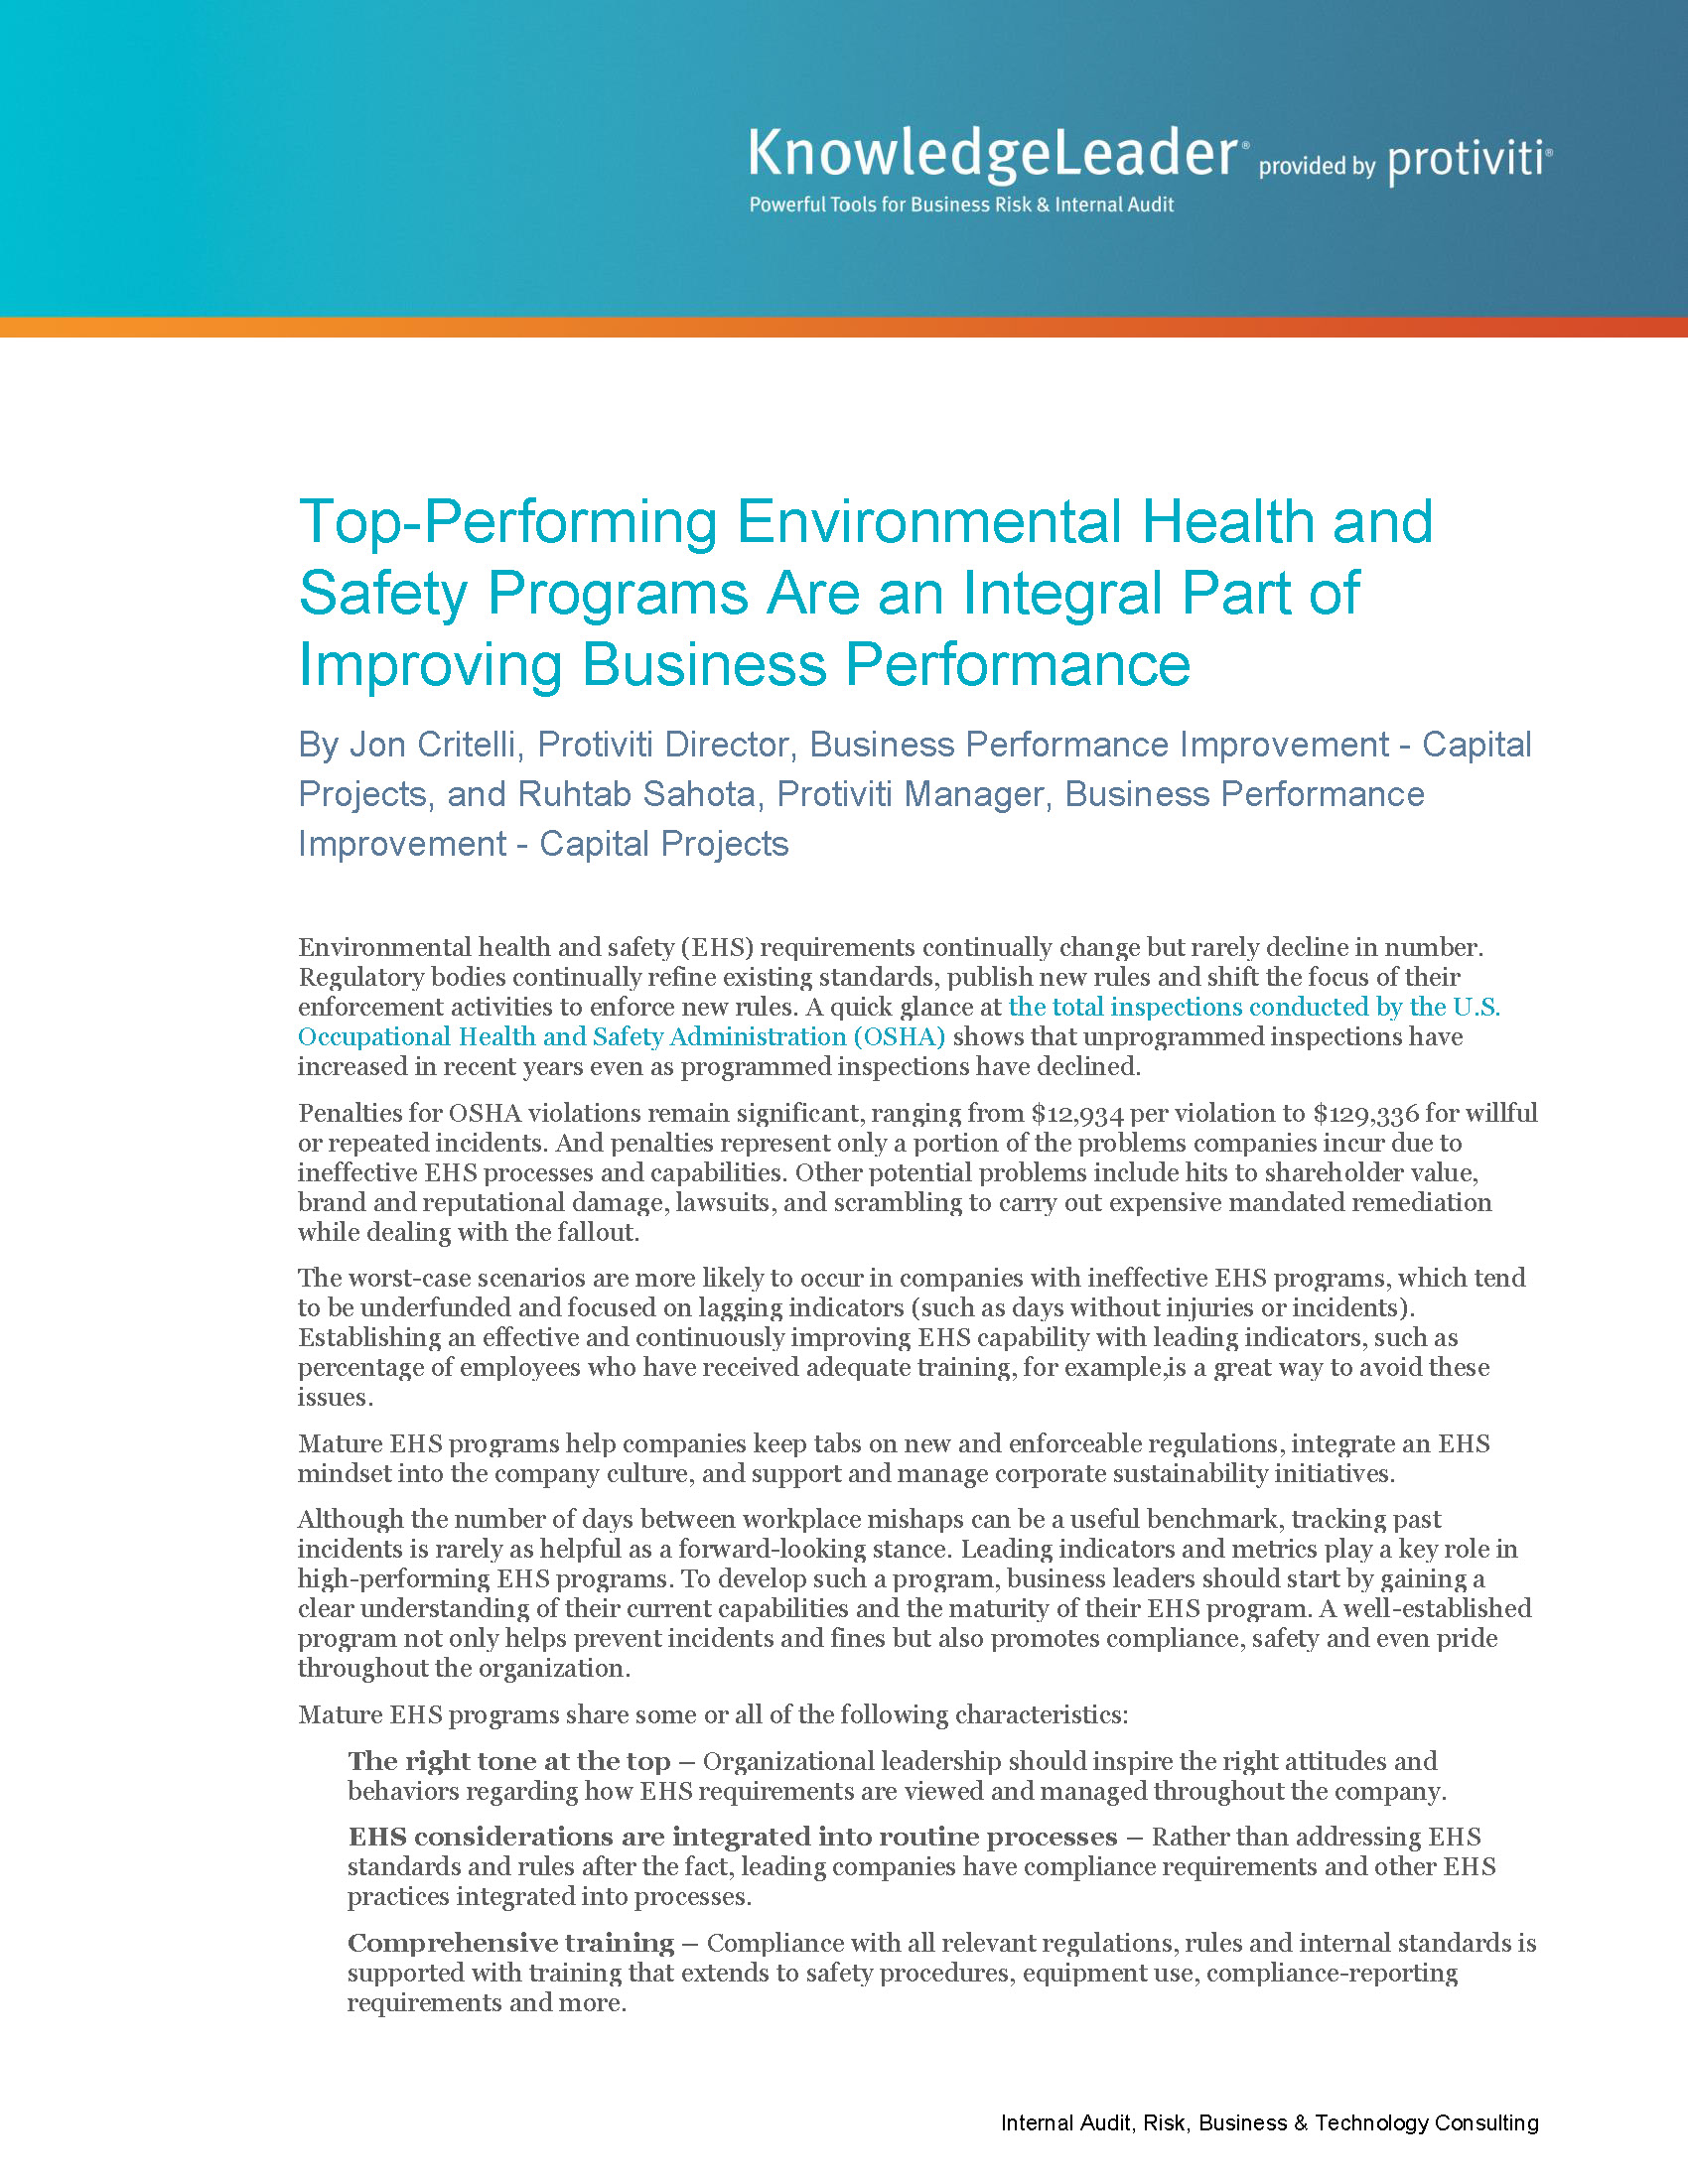 Screenshot of the first page of Top-Performing Environmental Health and Safety Programs Are an Integral Part of Improving Business Performance